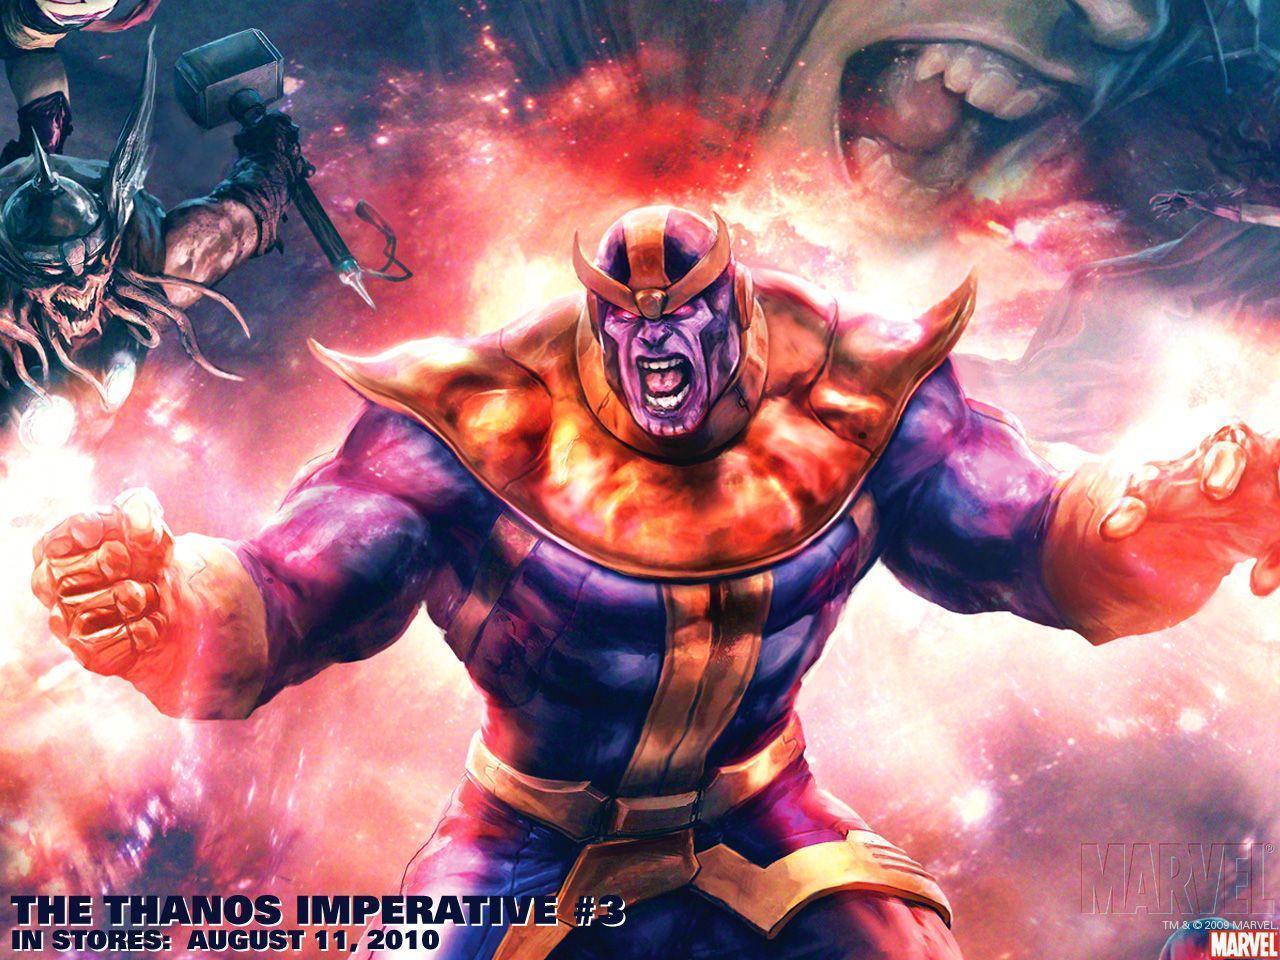 The Thanos Imperative (2010) Wallpaperth Anniversary